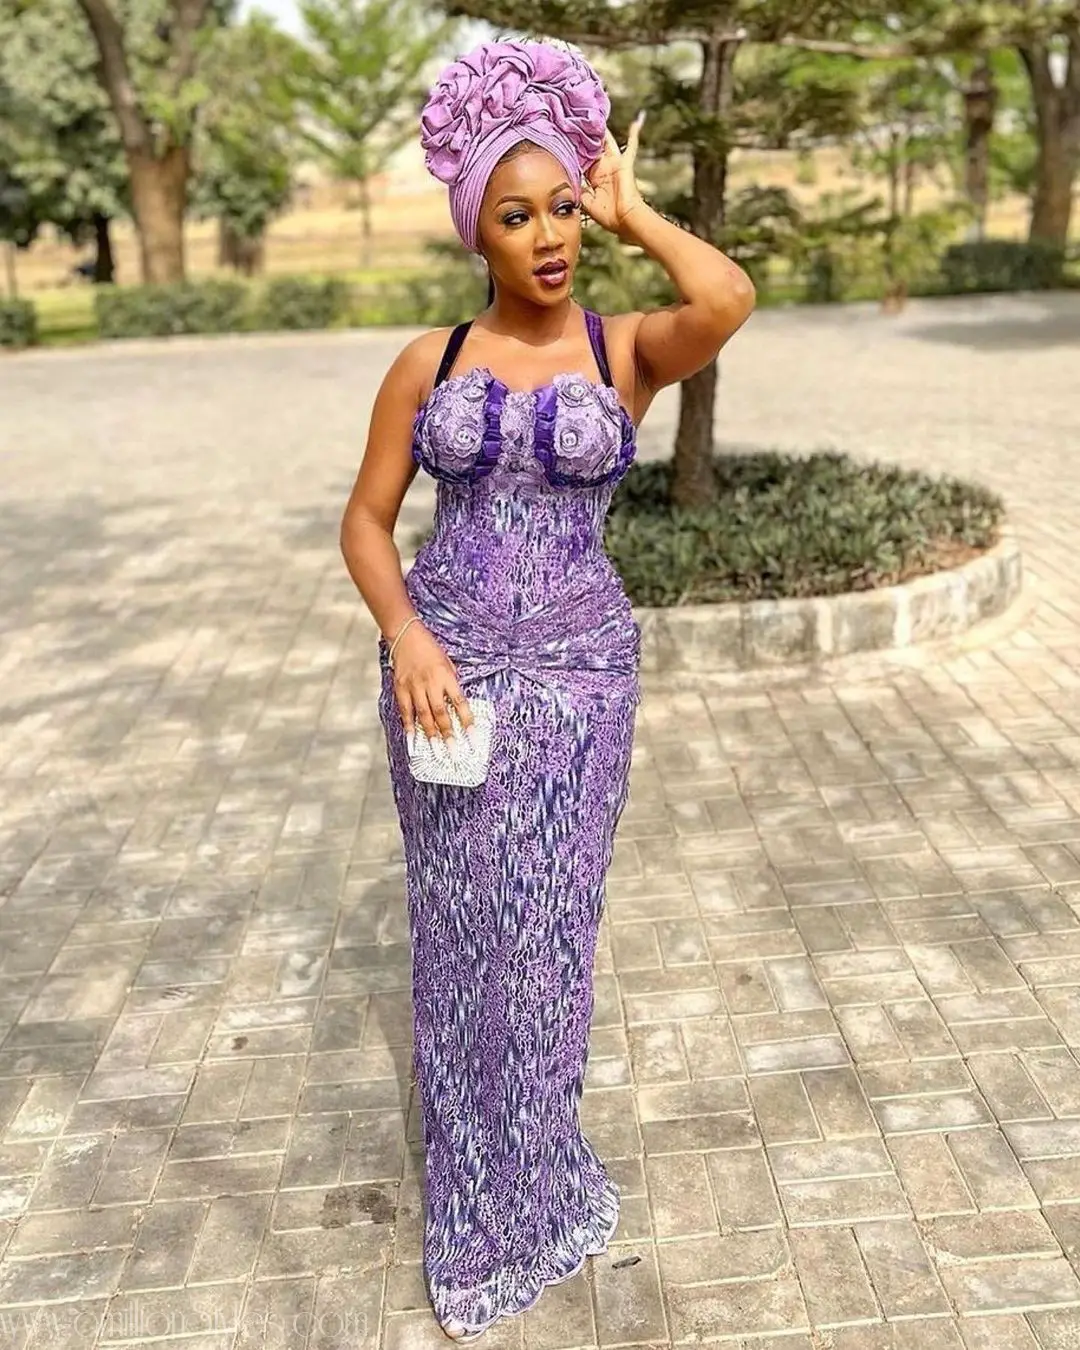 Avoid "Had I Known" With These 10 Simple Asoebi Styles Any Tailor Can Recreate